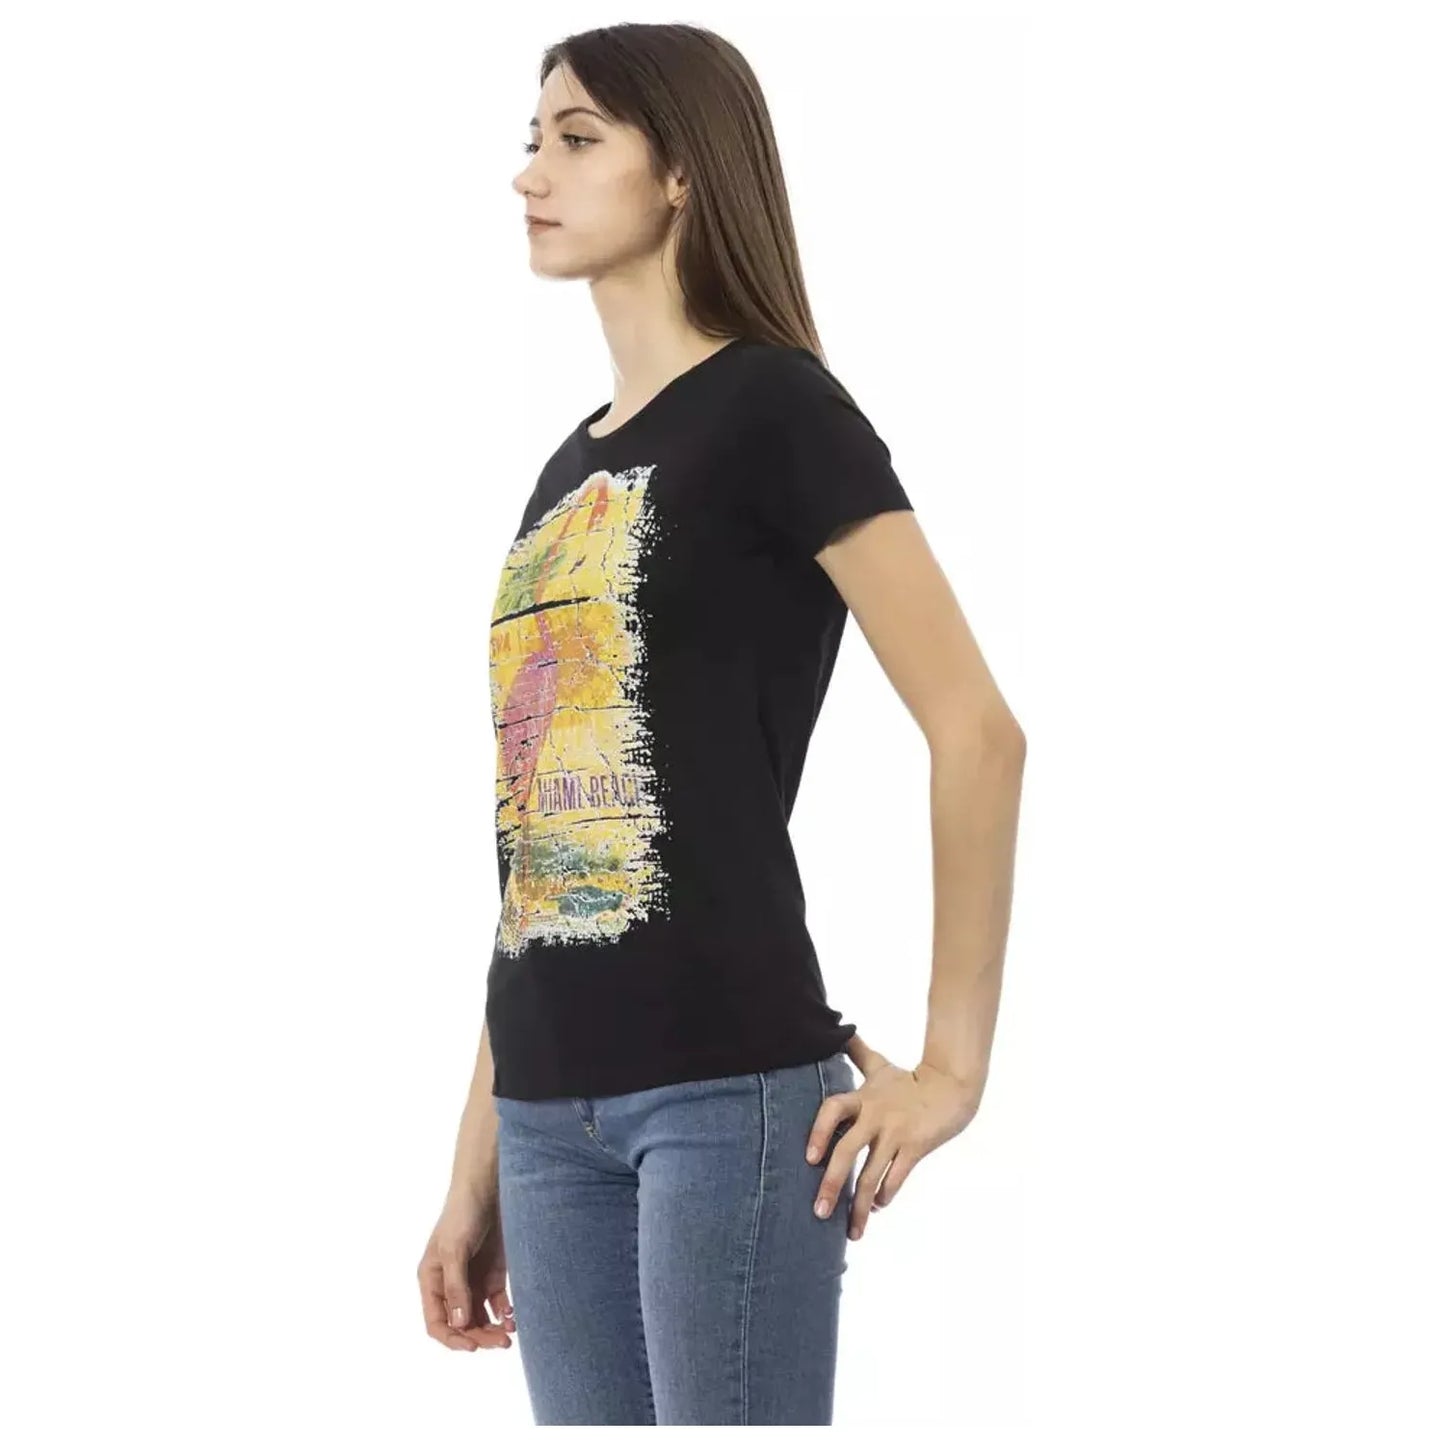 Trussardi Action Chic Black Round Neck Tee with Front Print black-cotton-tops-t-shirt-17 product-23026-2043054347-20-59ee9504-53b.webp